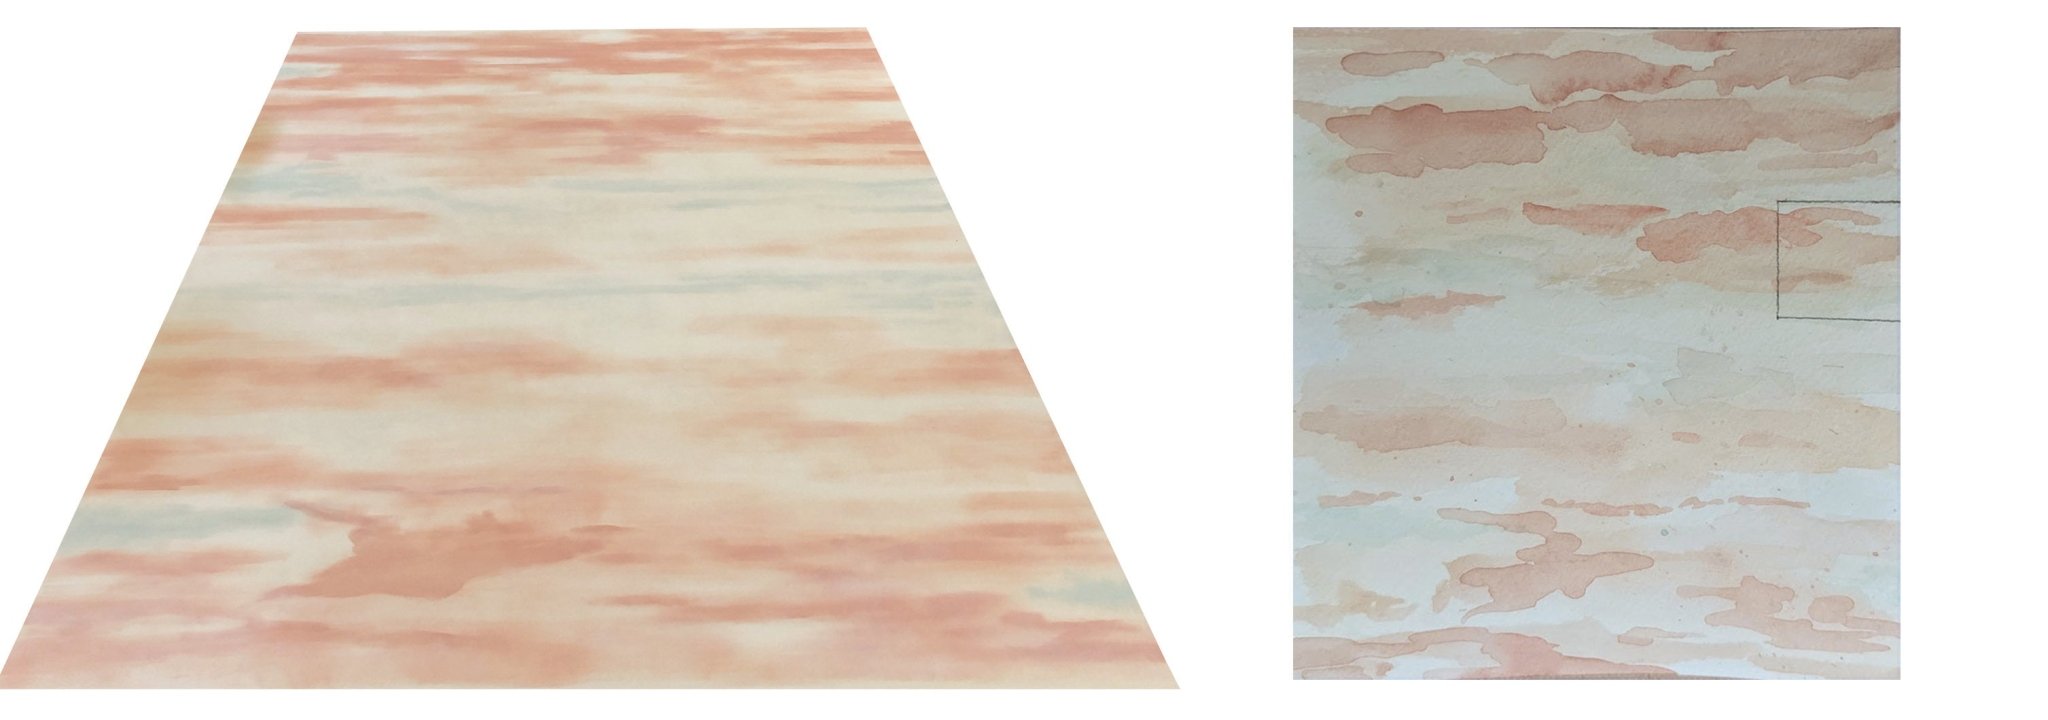 A side-by-side comparison the the 9.5' x  12.5' floorcloth and the 5" x 7" watercolor that inspired it.